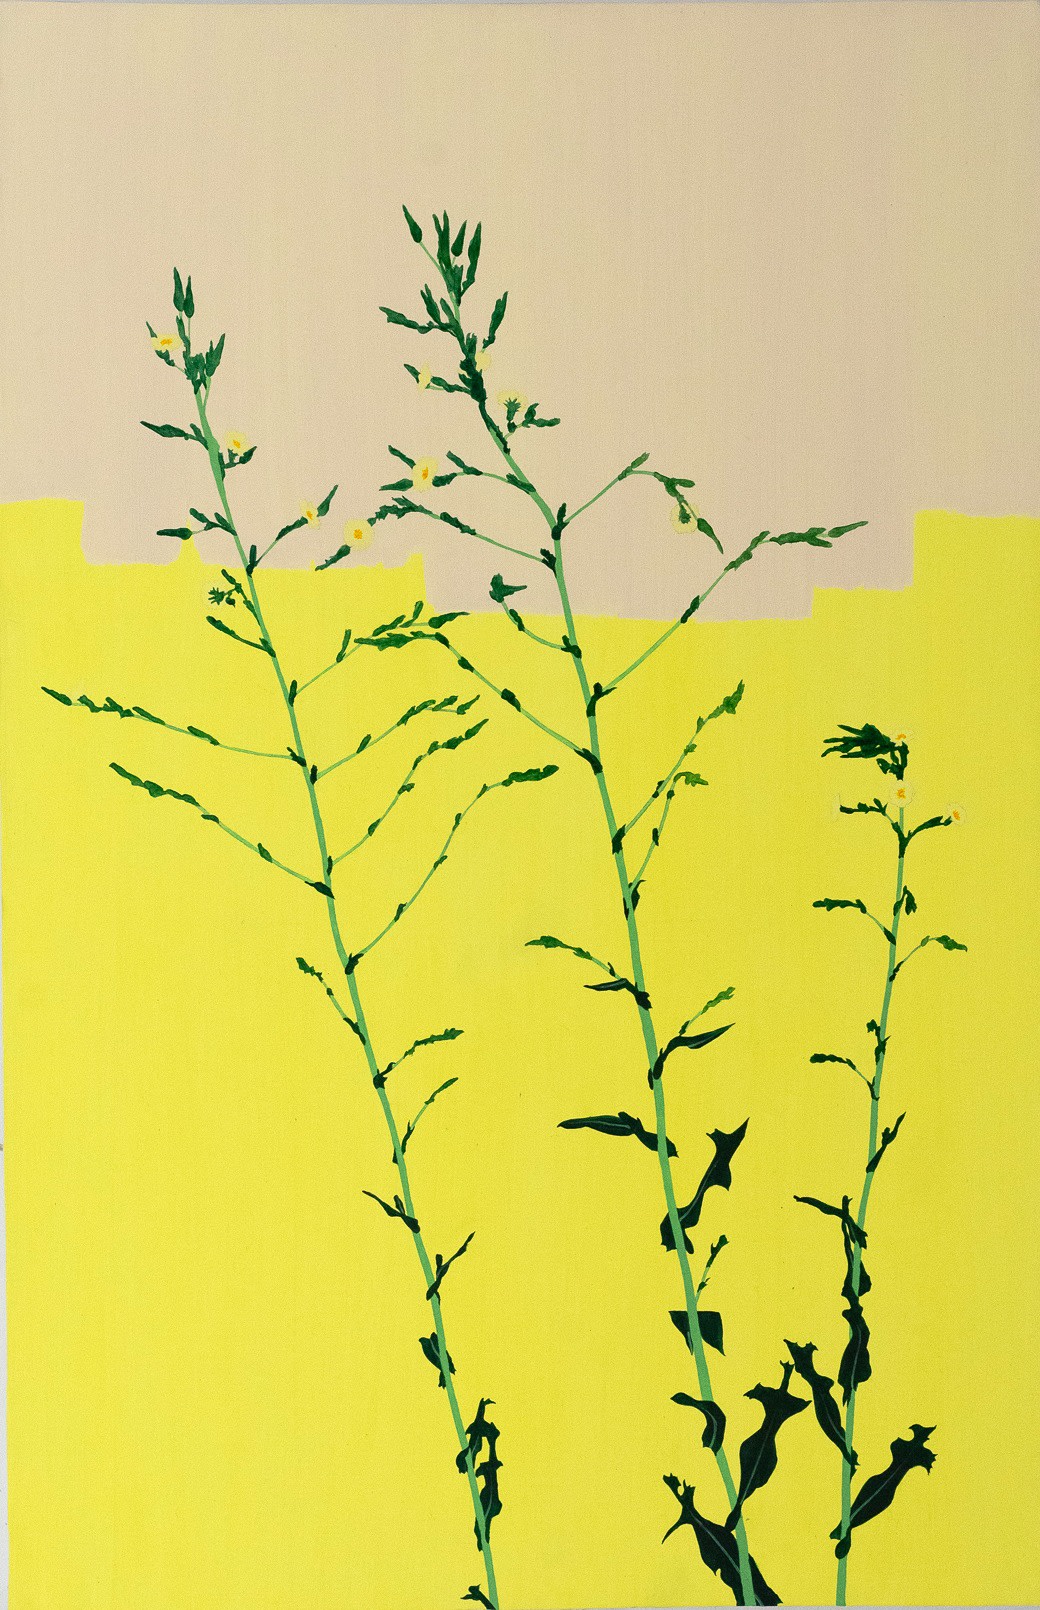 Hannah Cole  Life After a Hard Winter (Yellow on Yellow Weed), 2017  Acrylic on canvas  37h x 24w in 93.98h x 60.96w cm  HC_031 Photorealistic painting